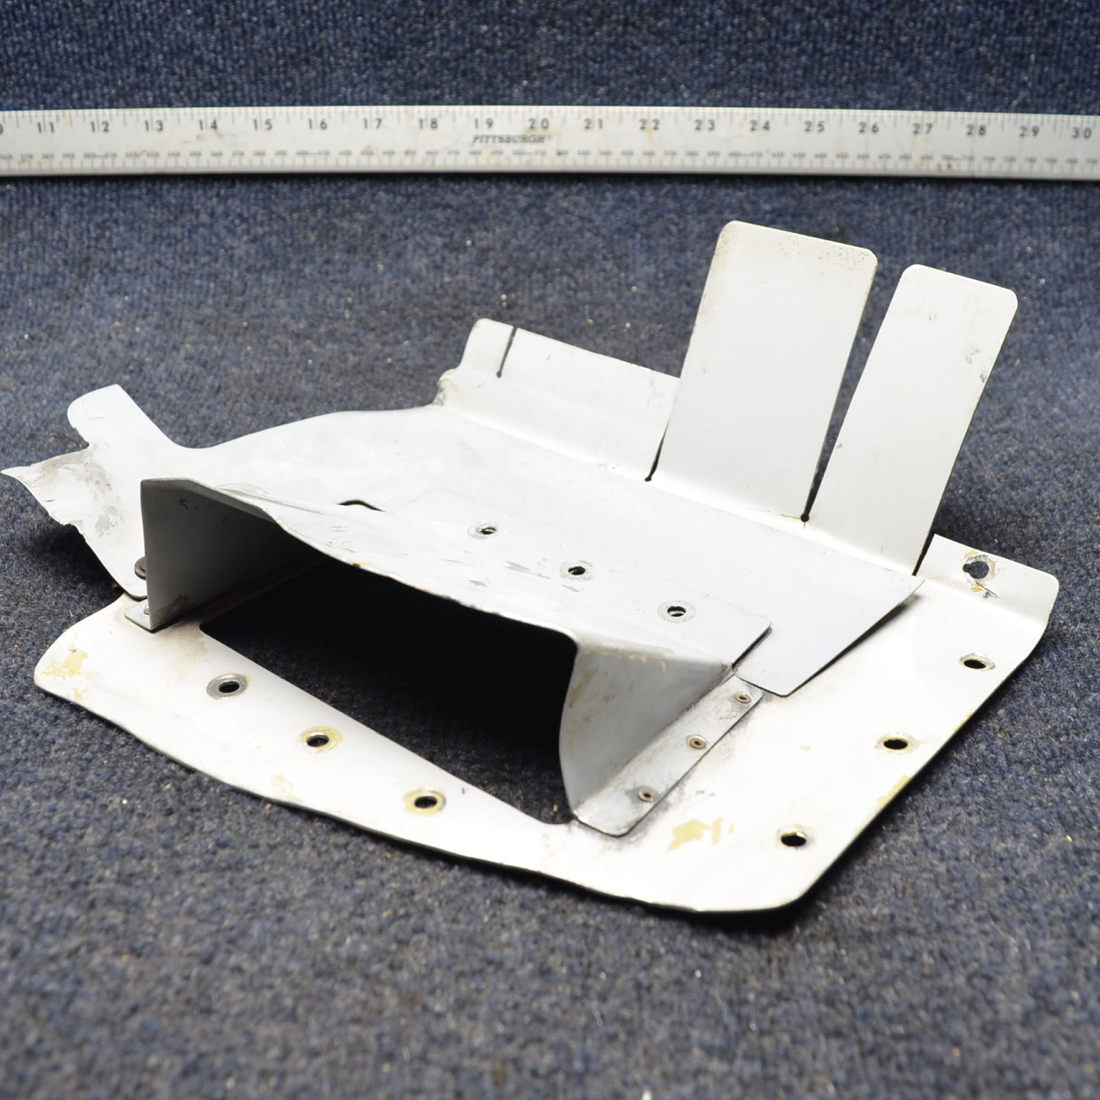 Used aircraft parts for sale, 502003-4 PIPER- CESSNA-BEECH- MOONEY VARIOS GRUMMAN FRONT SIDE BAFFLE